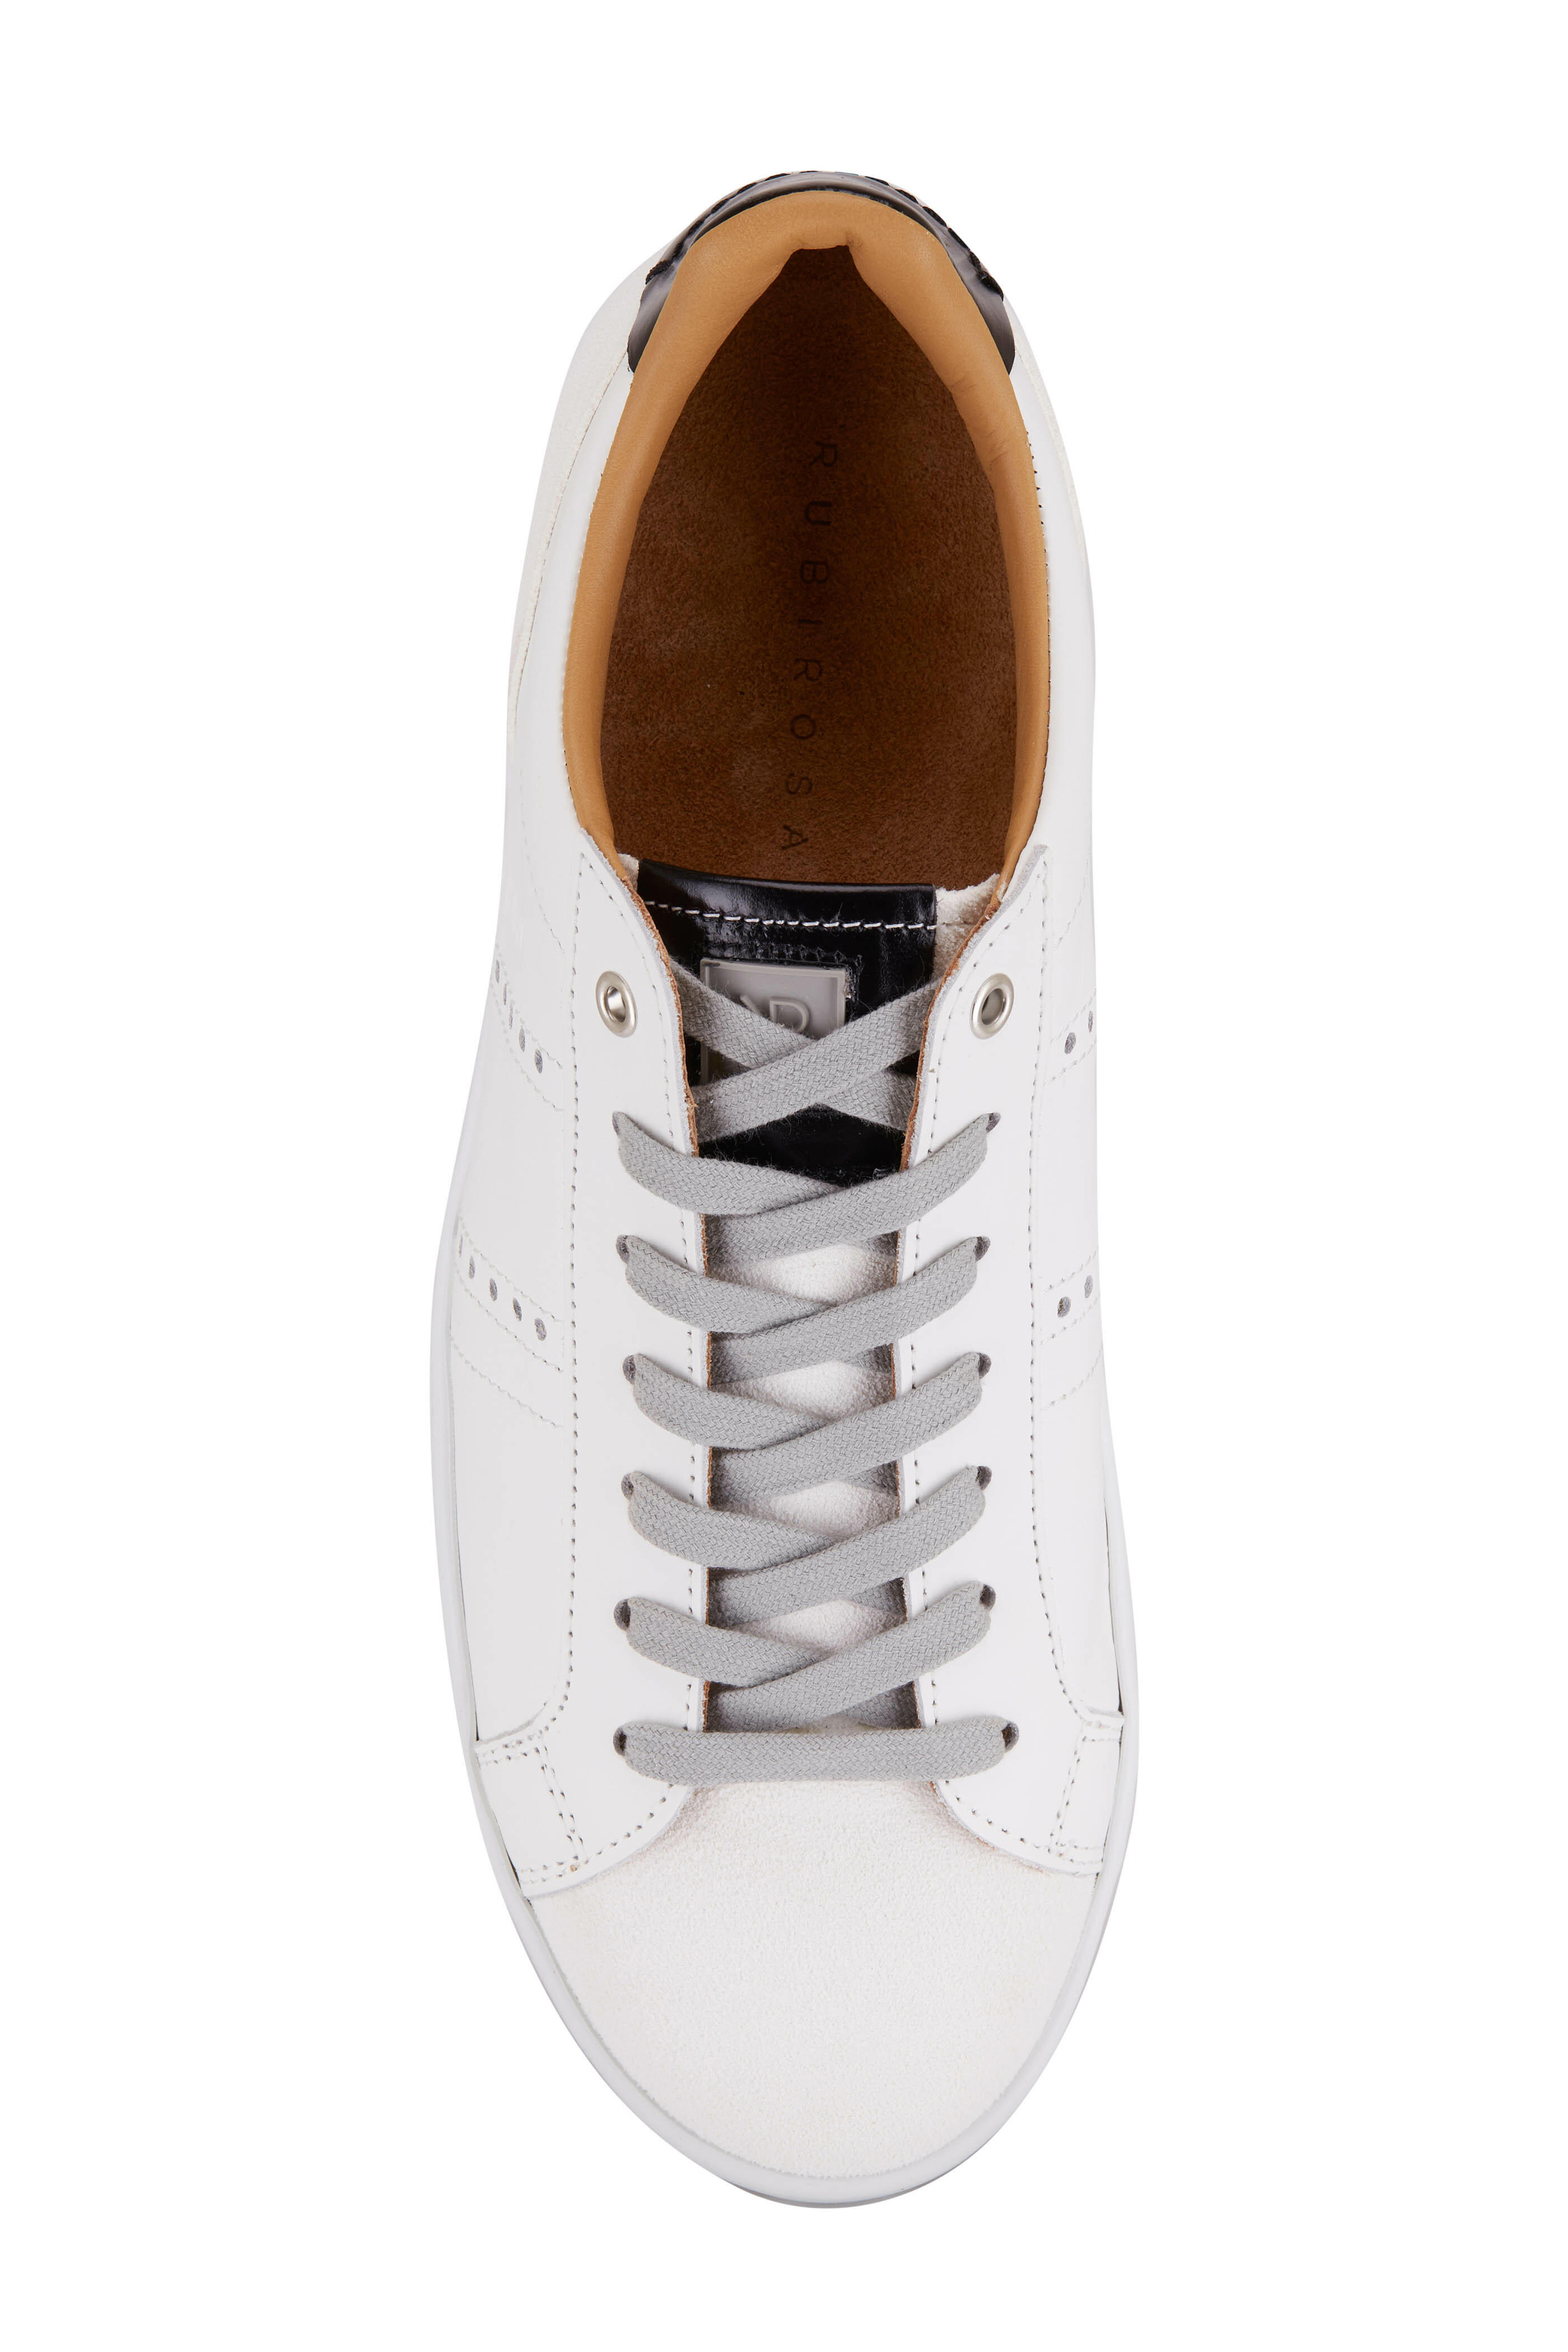 RUBIROSA - Odile White Leather & Suede Low Top Sneaker